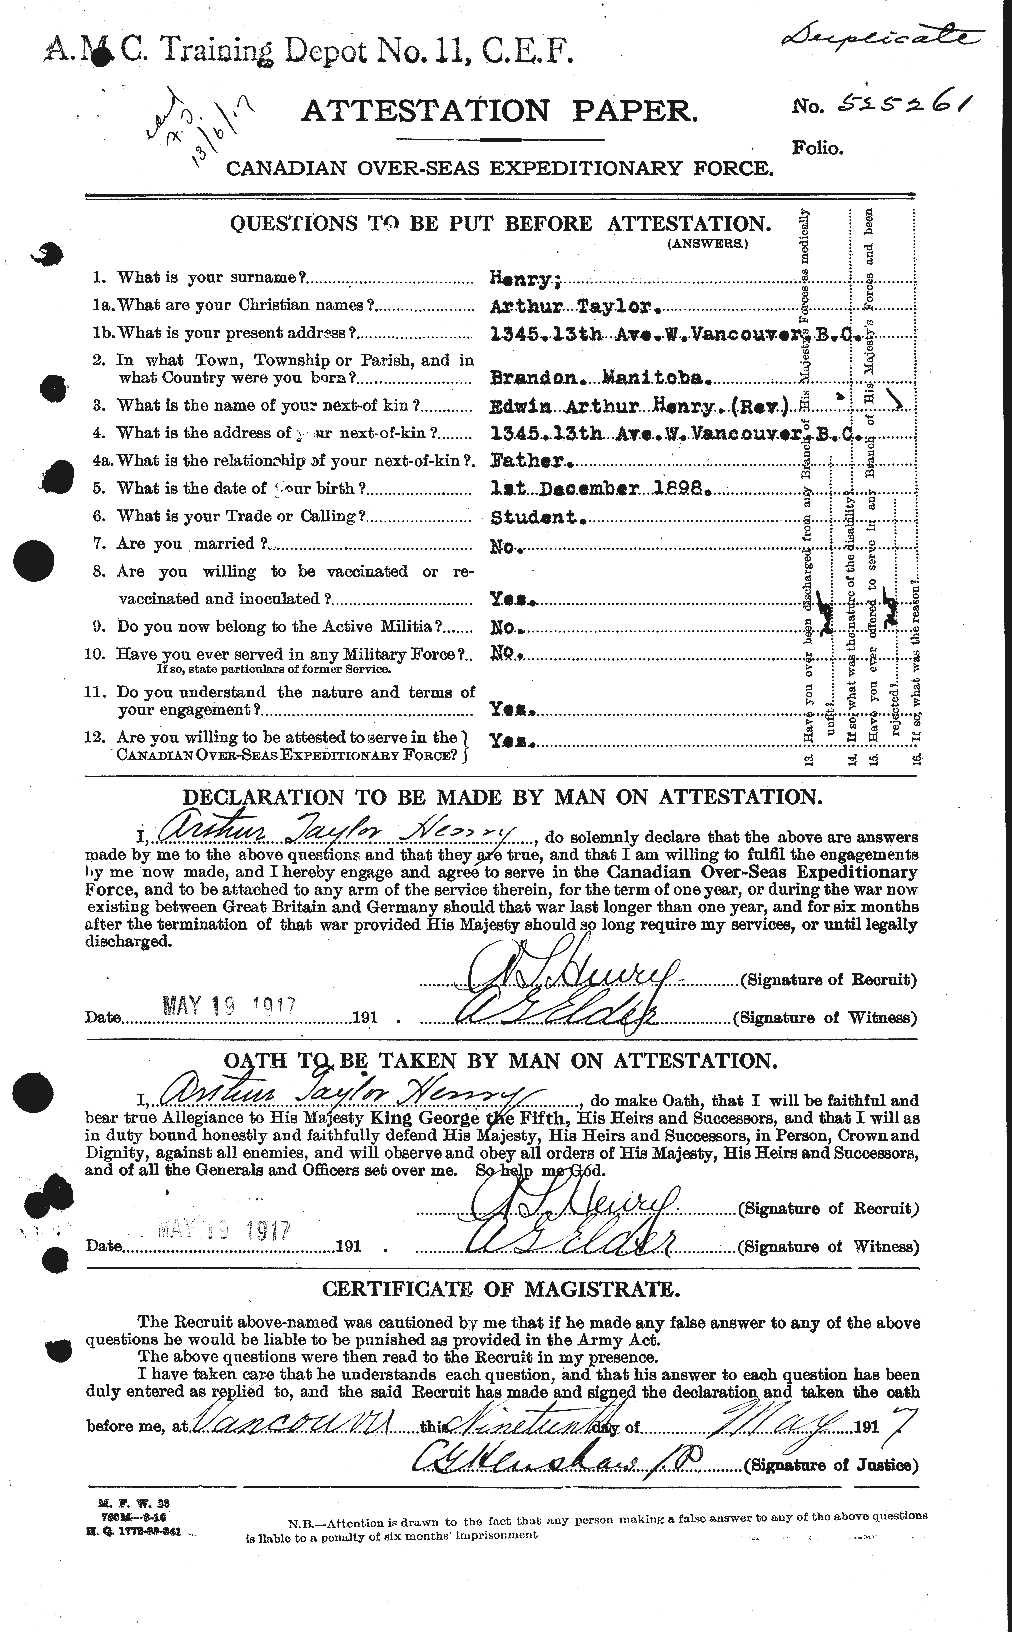 Personnel Records of the First World War - CEF 392786a